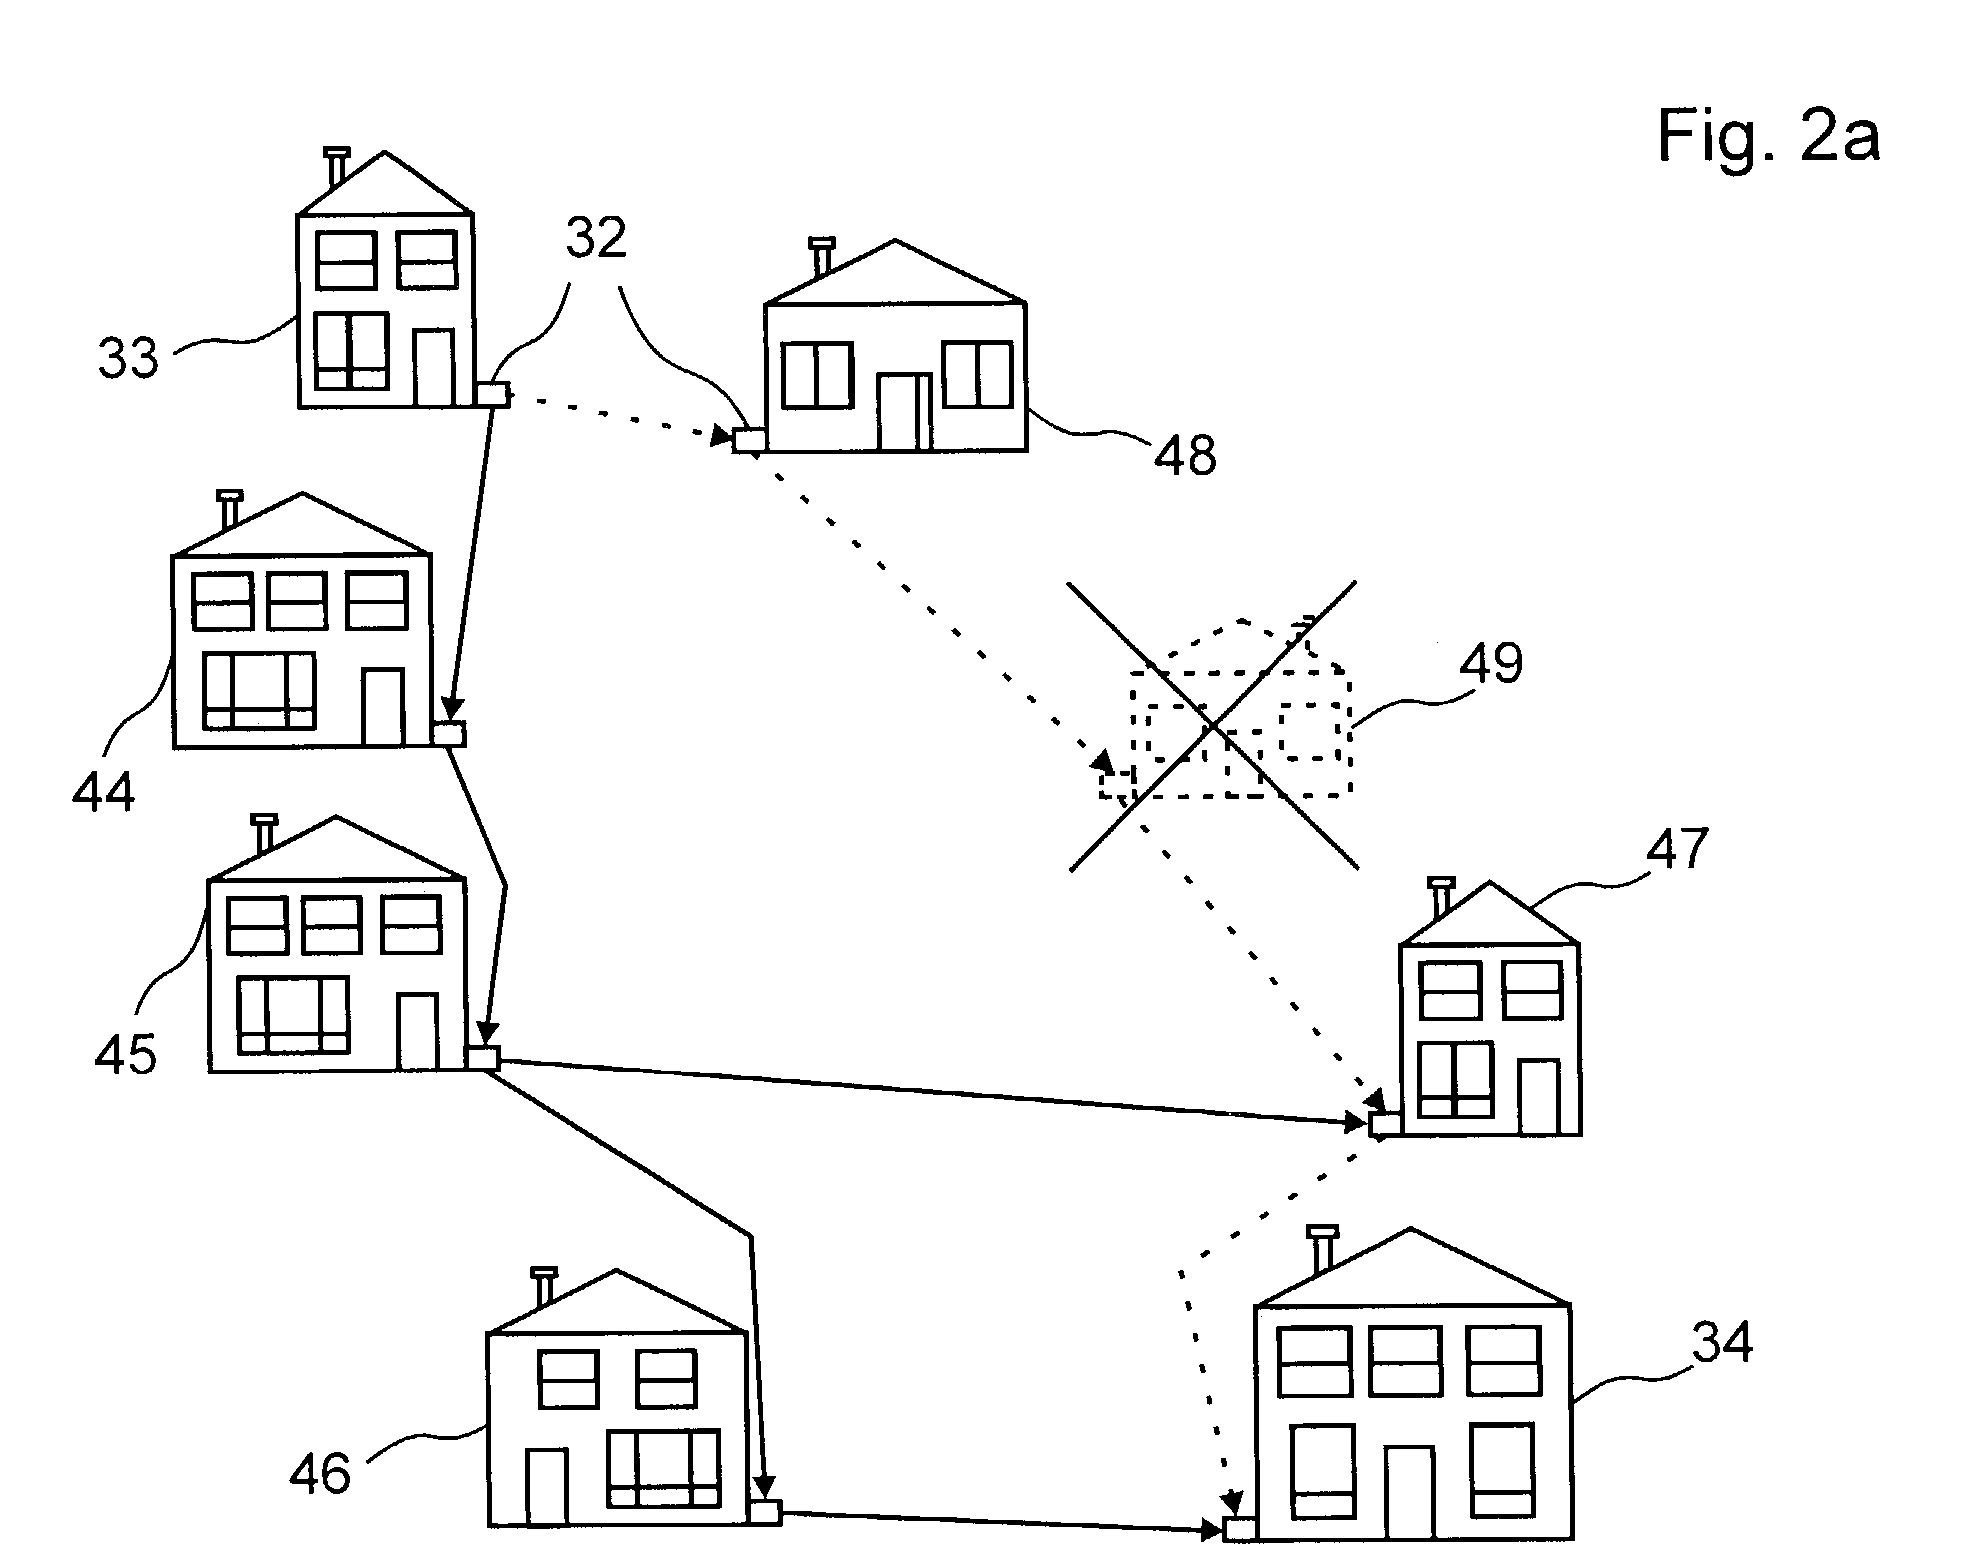 Communication nodes for use with a wireless ad-hoc communication network